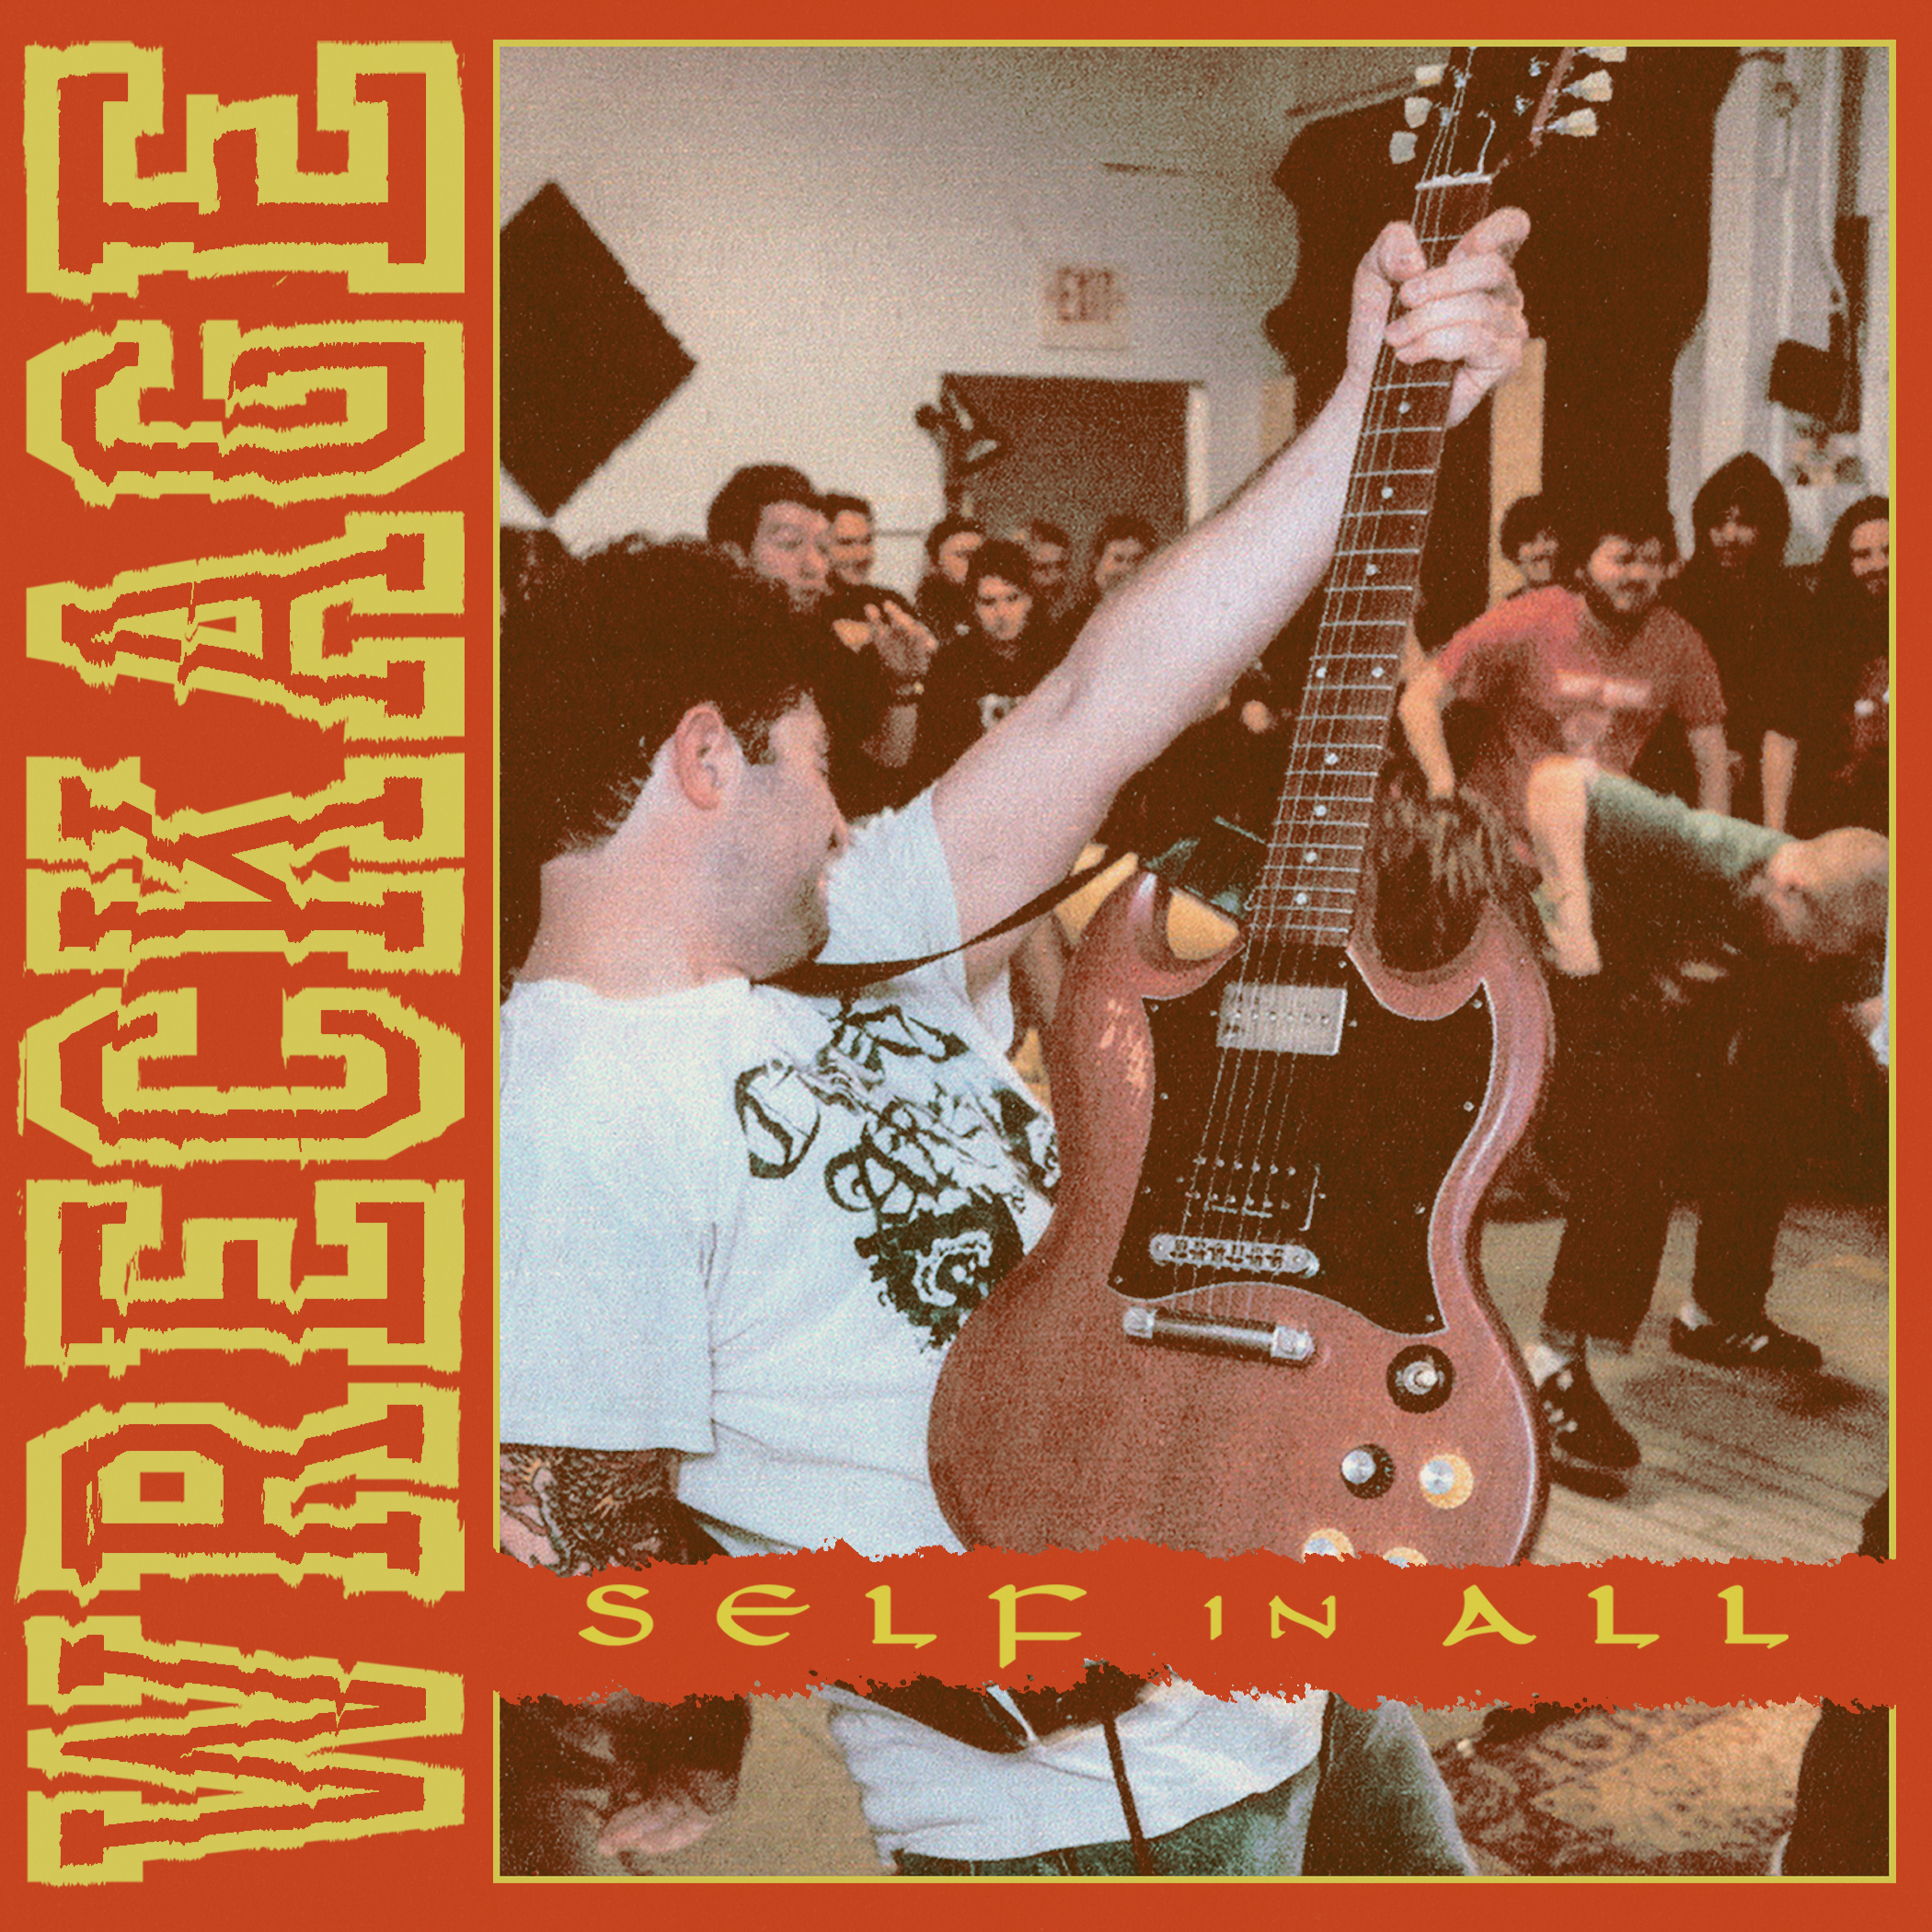 Stream Wreckage’s Unruly New EP Self In All